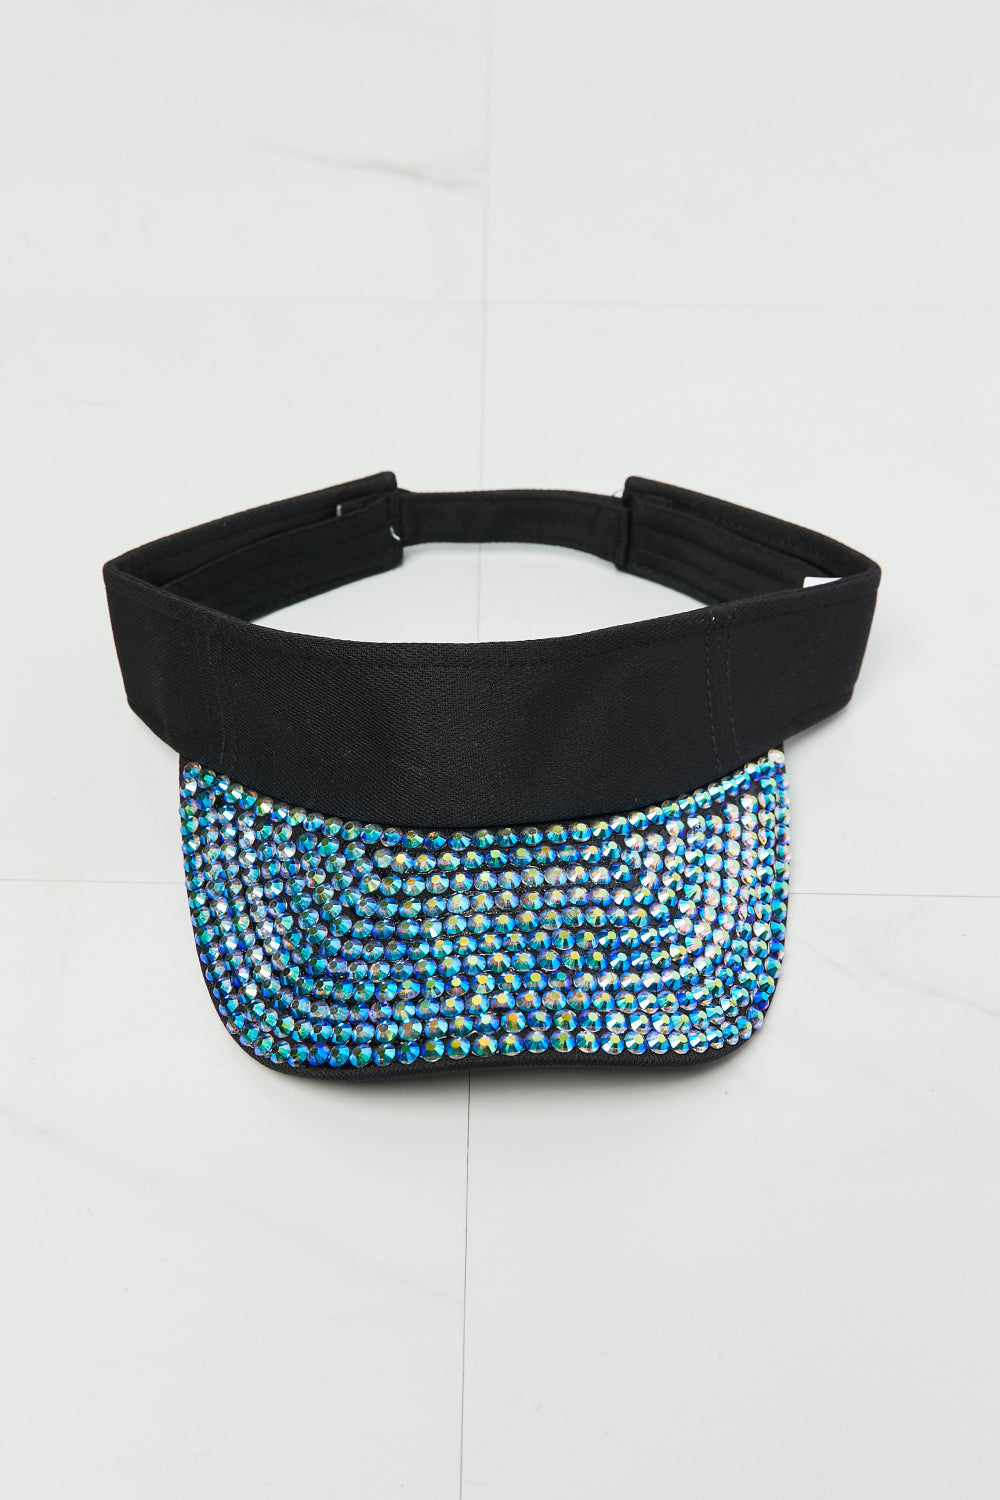 Fame Make It Sparkle Visor Hat Print on any thing USA/STOD clothes